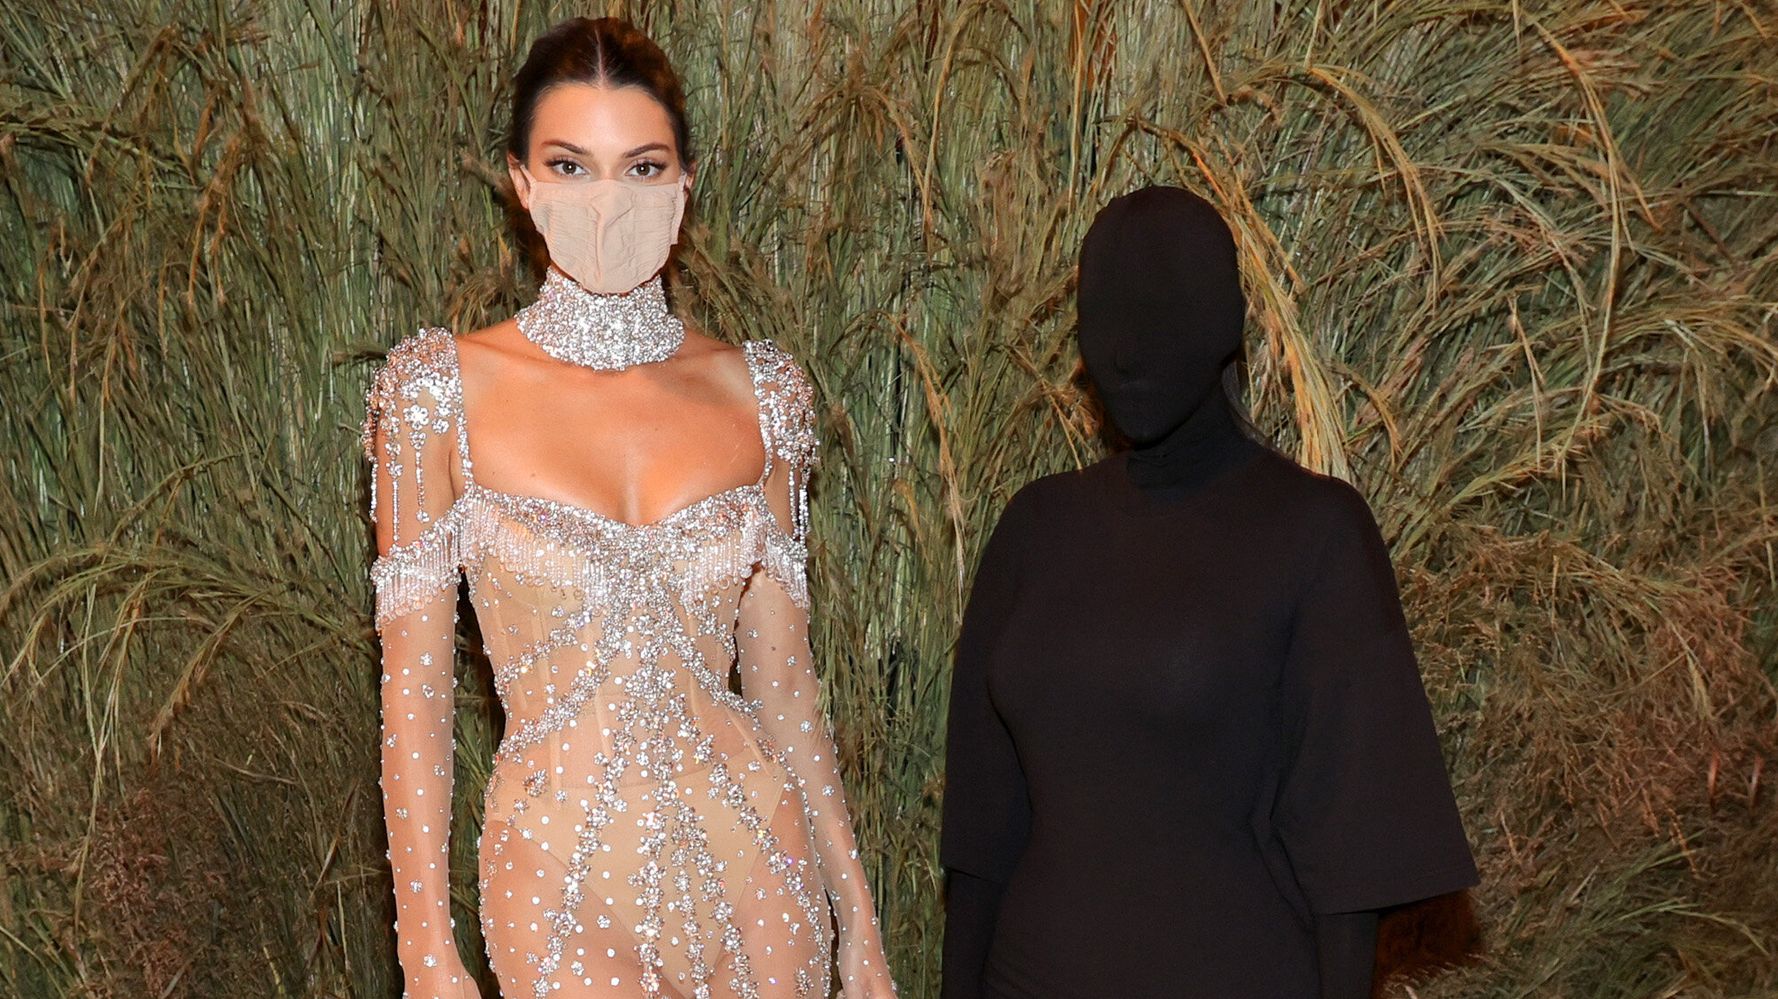 Here's What Kim Kardashian Looked Like Under Her Dementor-Chic Met Gala Gown